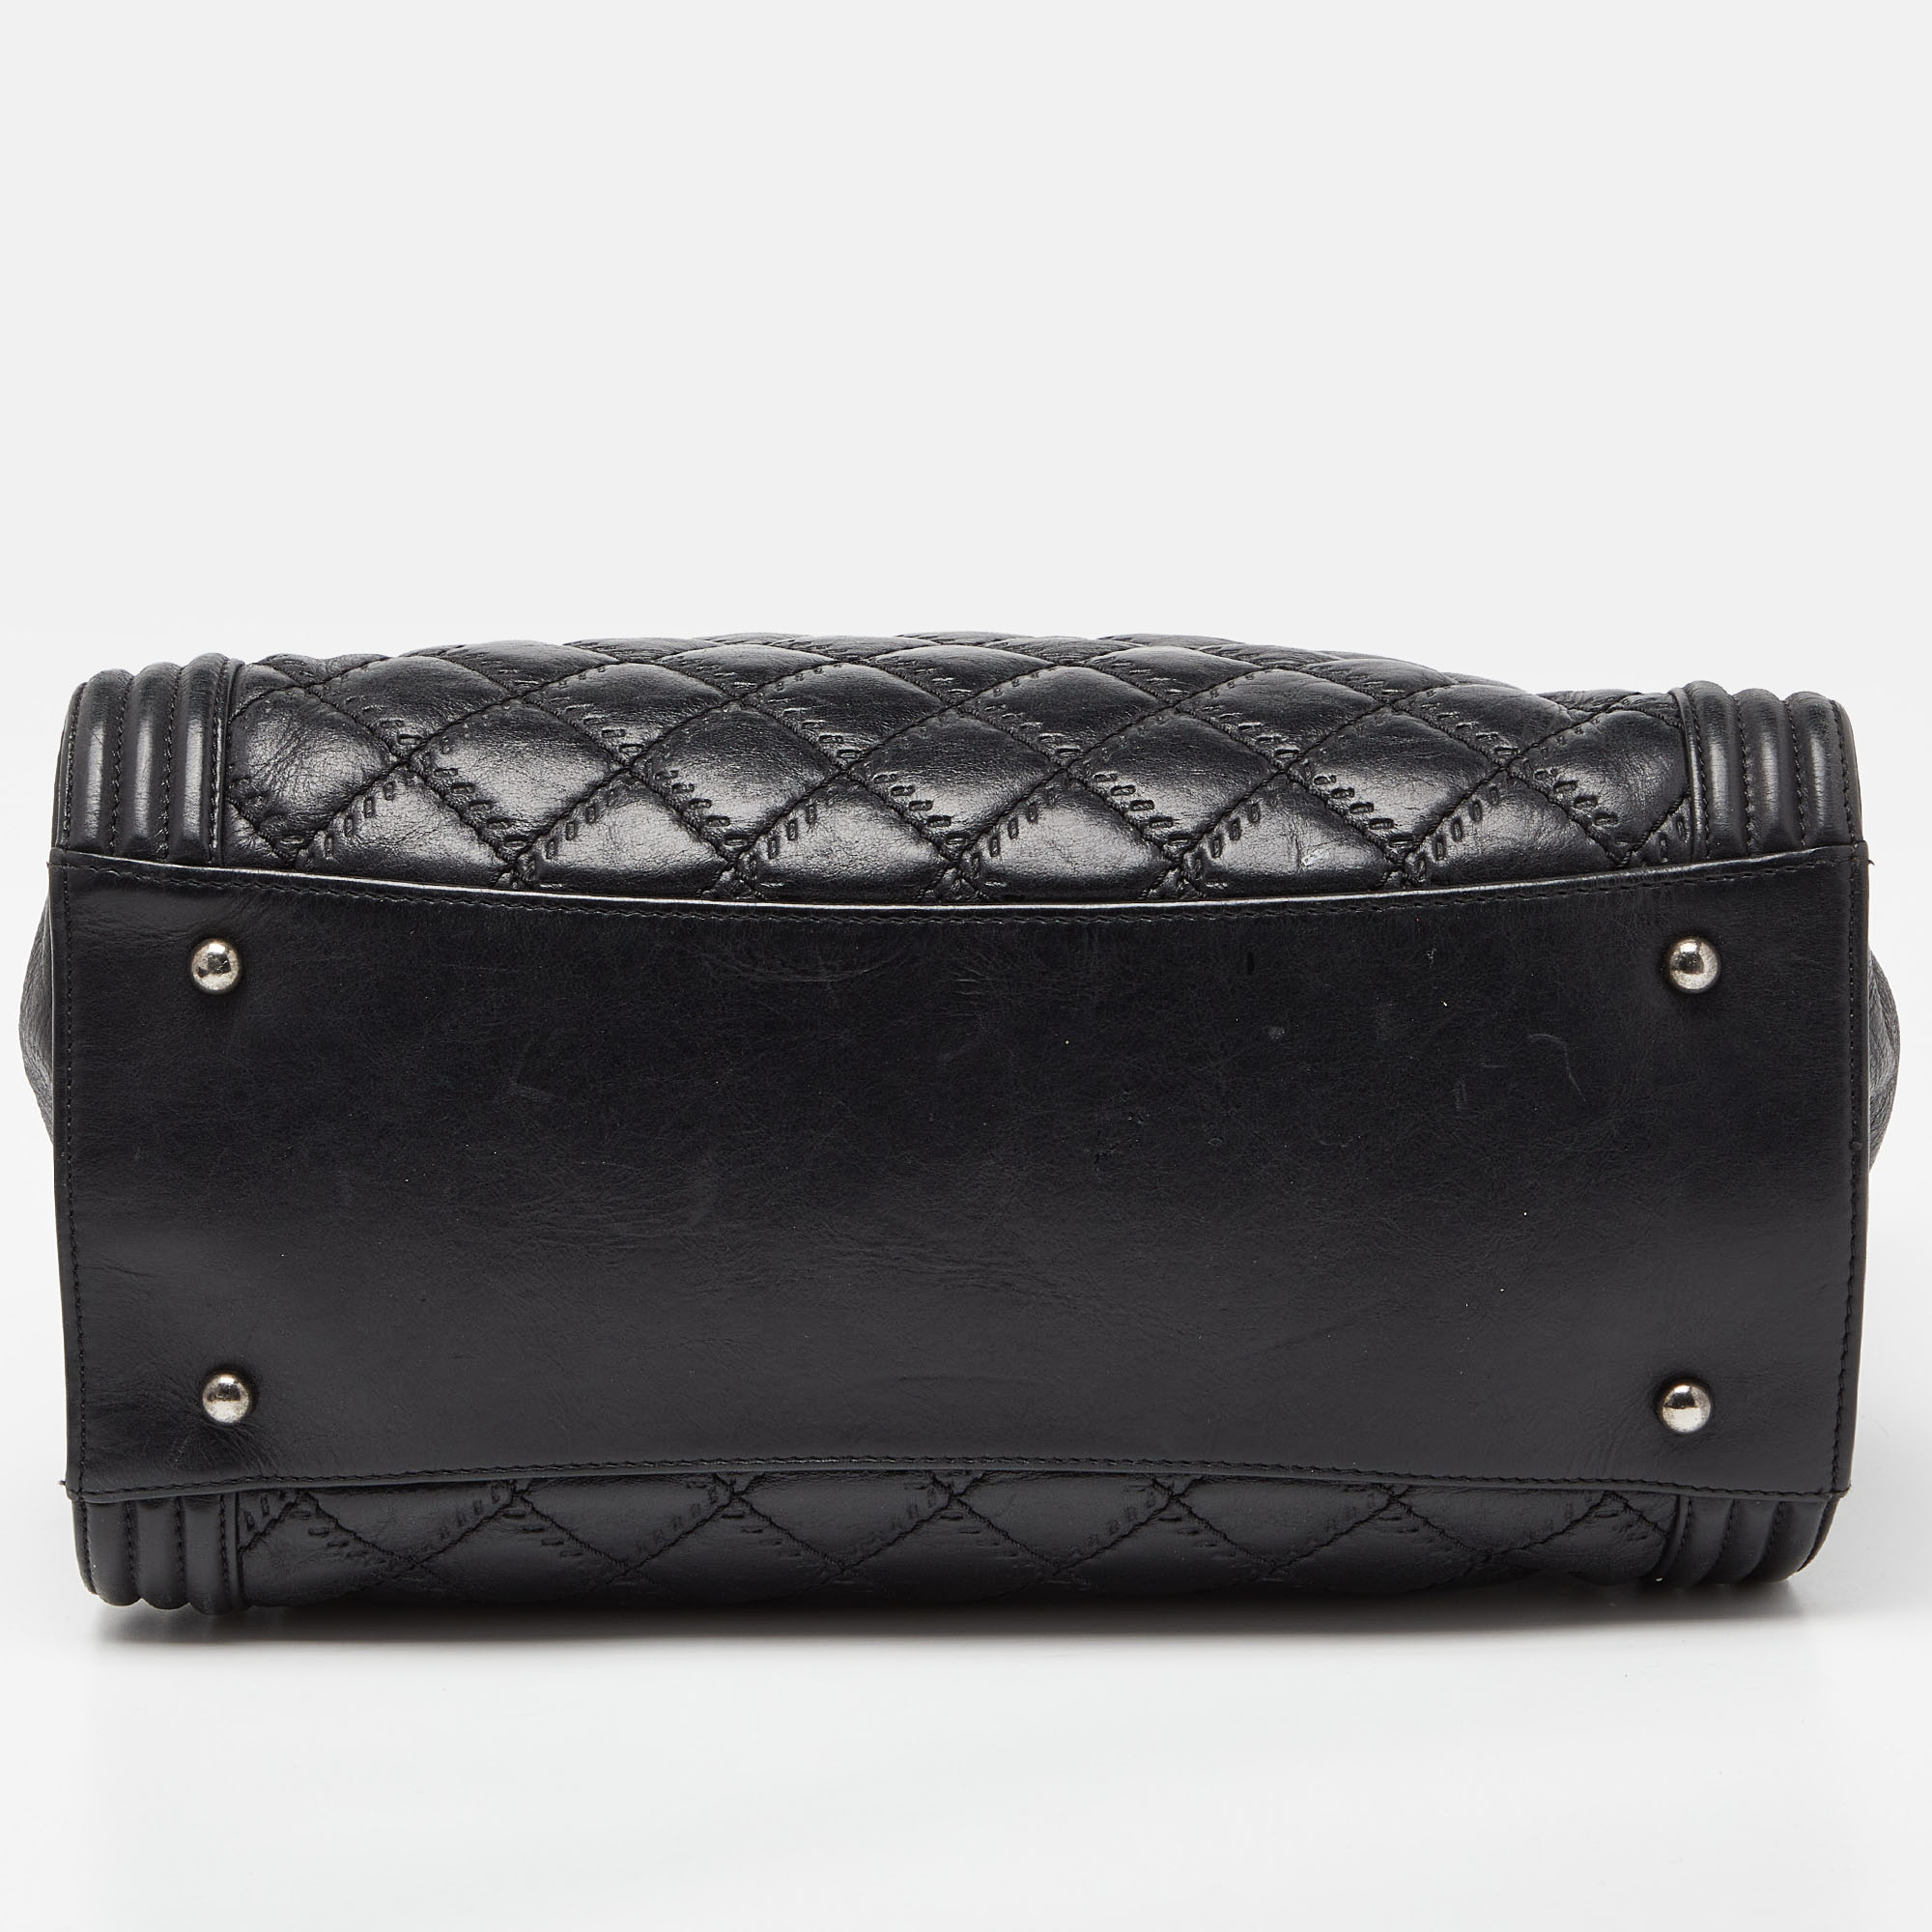 Chanel Black Quilted Double Stitch Leather Boy Tote